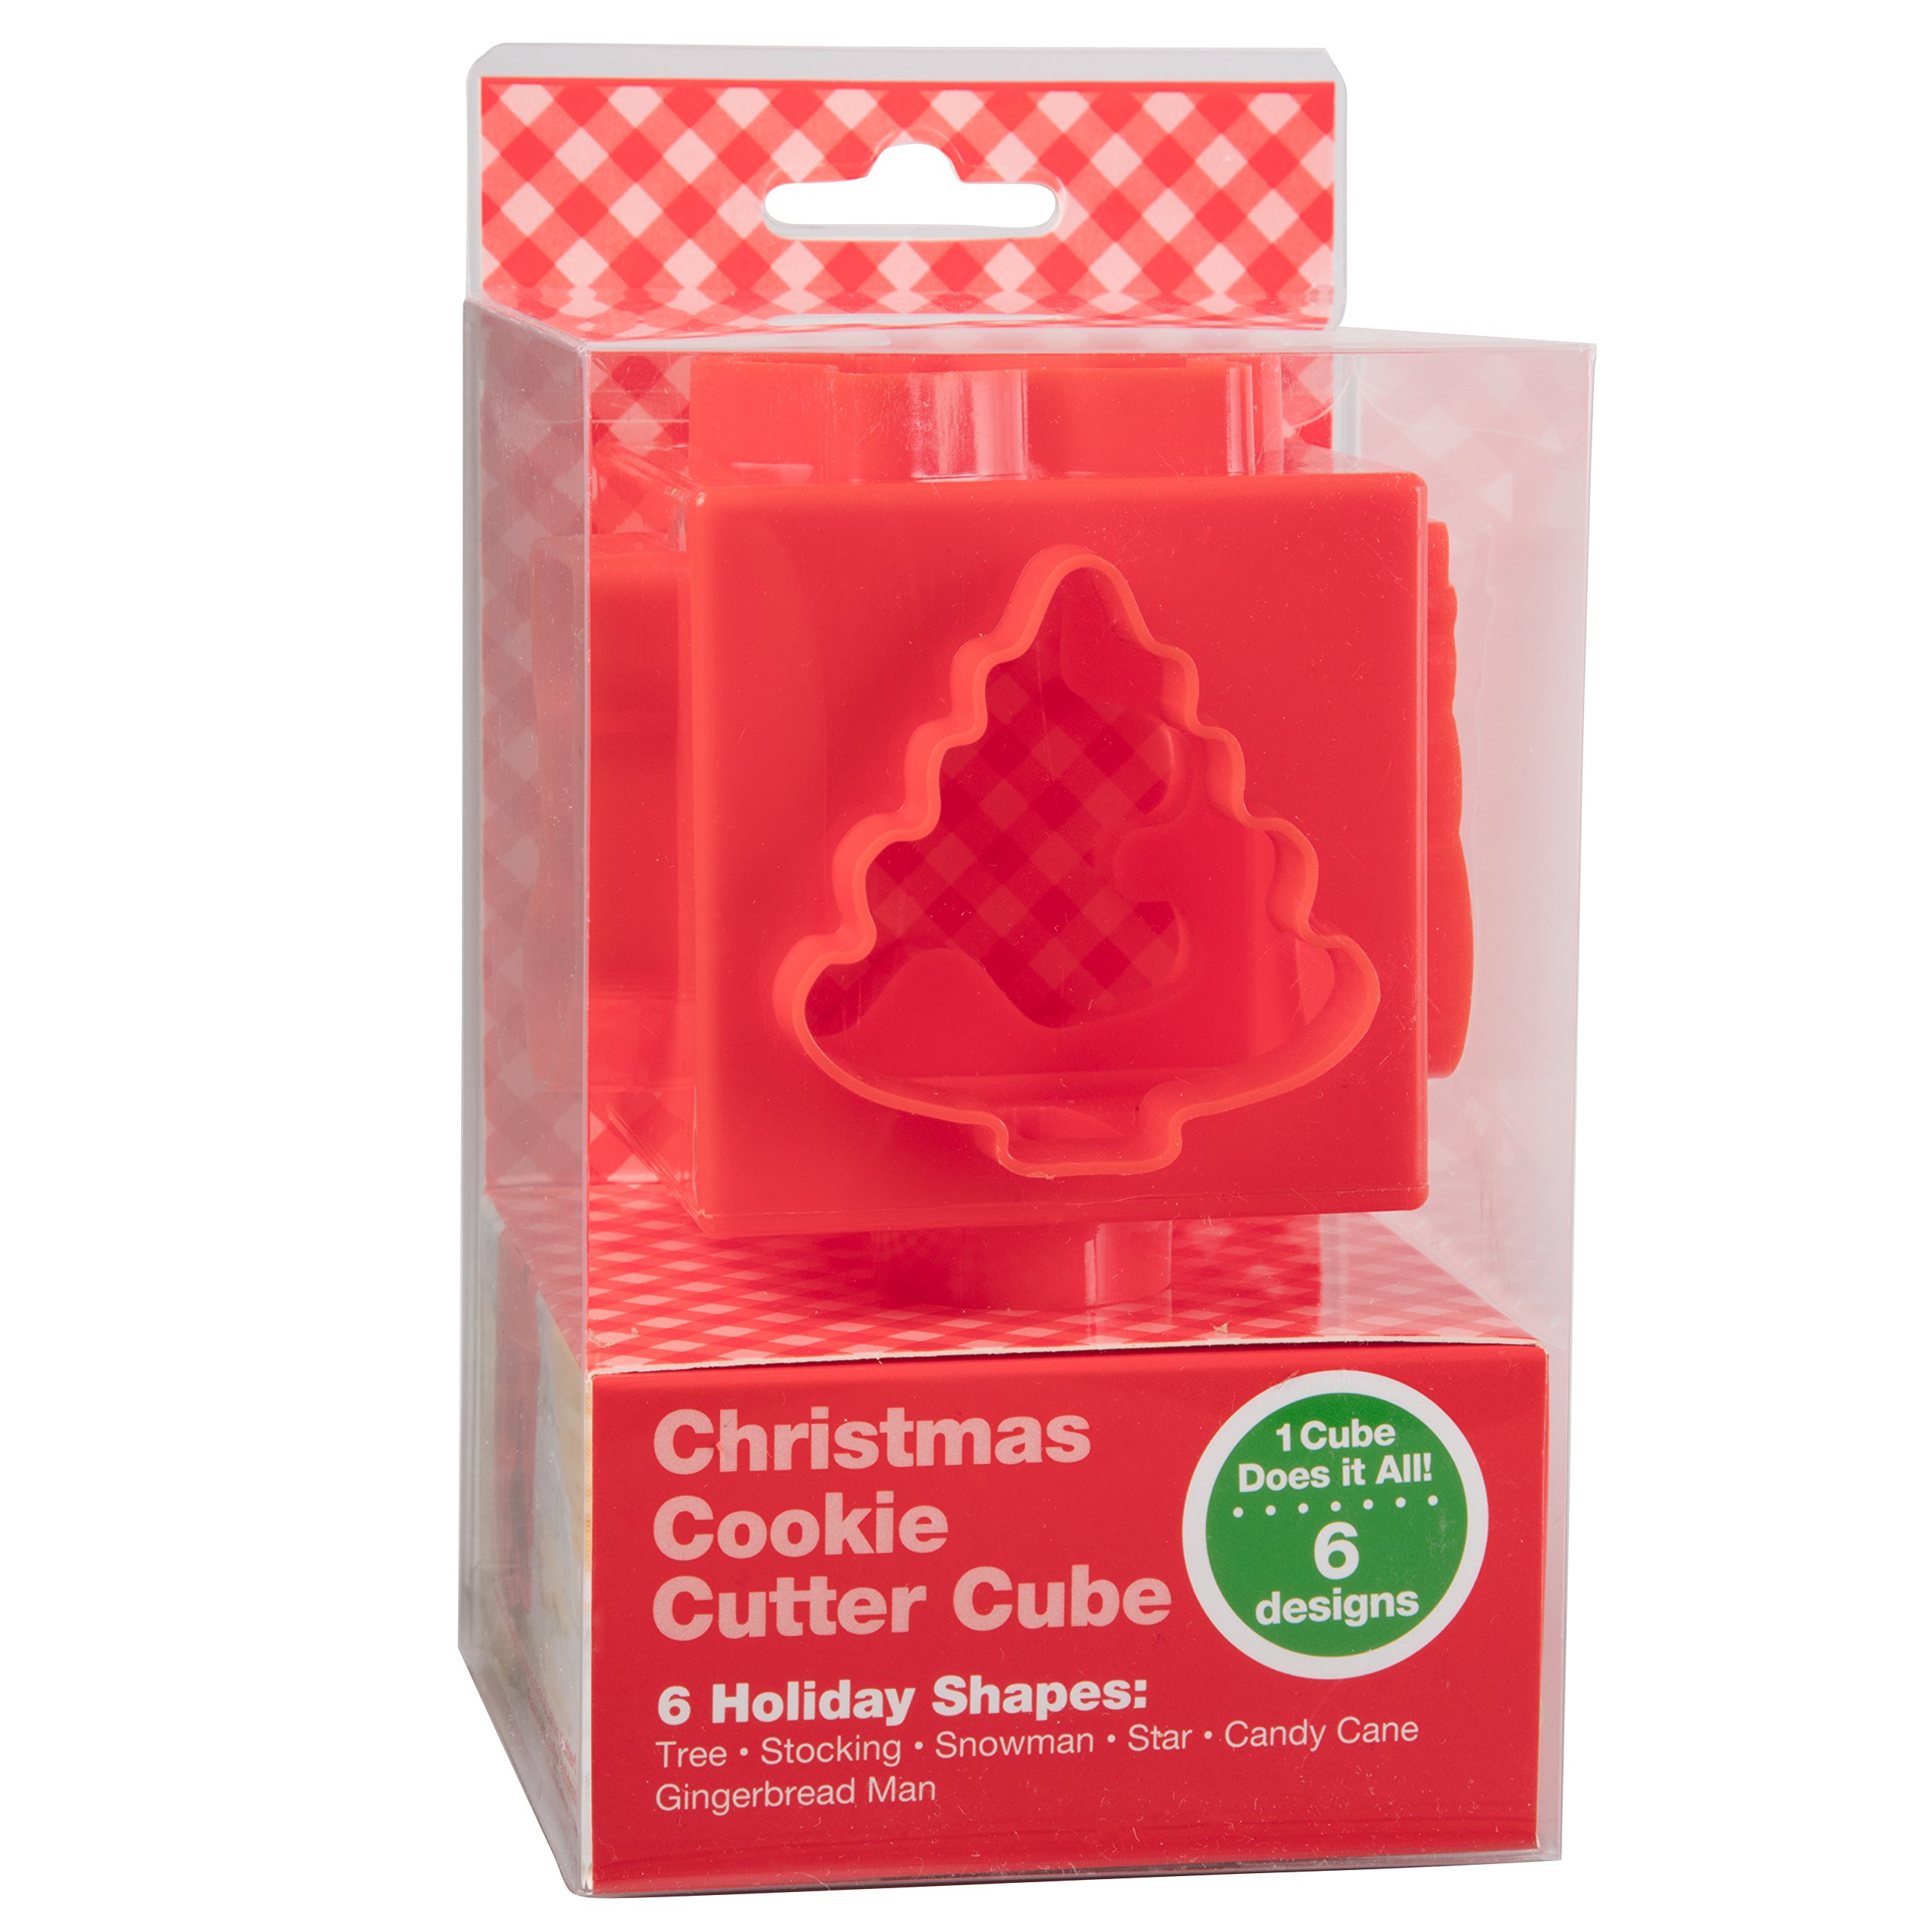 Christmas Cookie Cutter Cube-Holiday Party Cookie Easy Press Set w 6 Unique Winter Shapes- All in One 6-Sided Clutter Free Festive; Stocking Candy Cane Star Tree Gingerbread Man Dishwasher Safe Baking